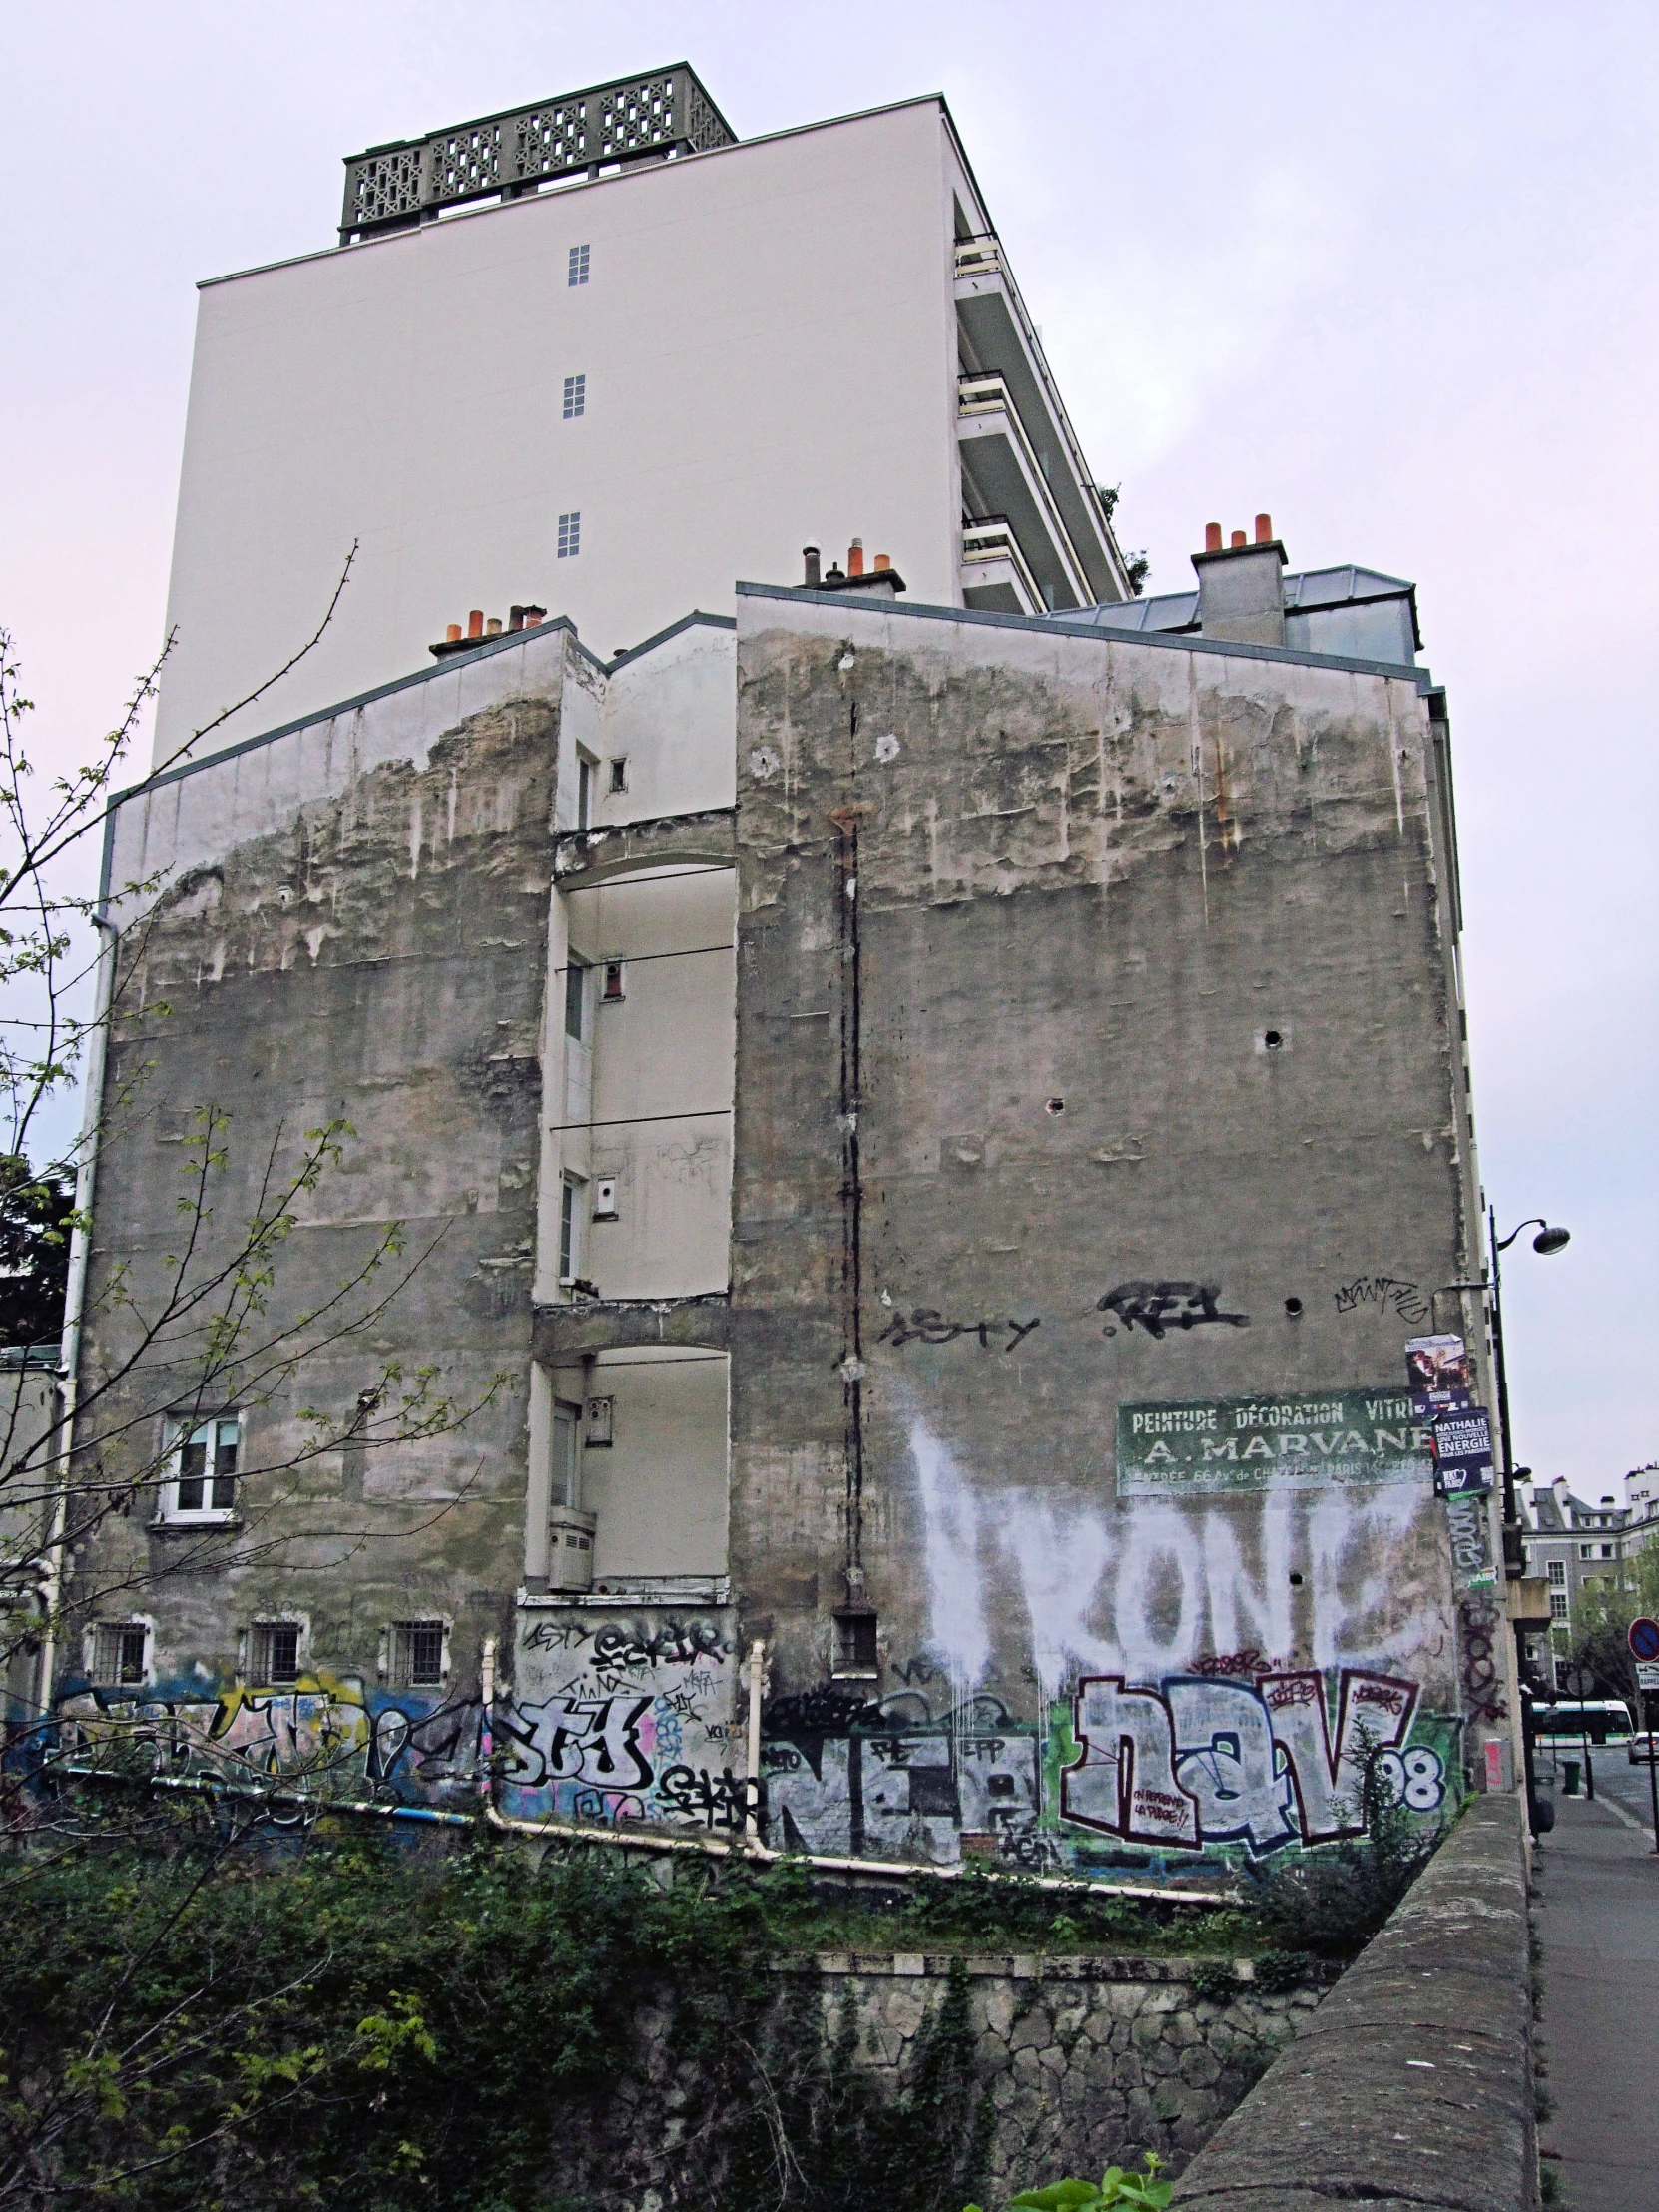 graffiti covered building with power lines on one side